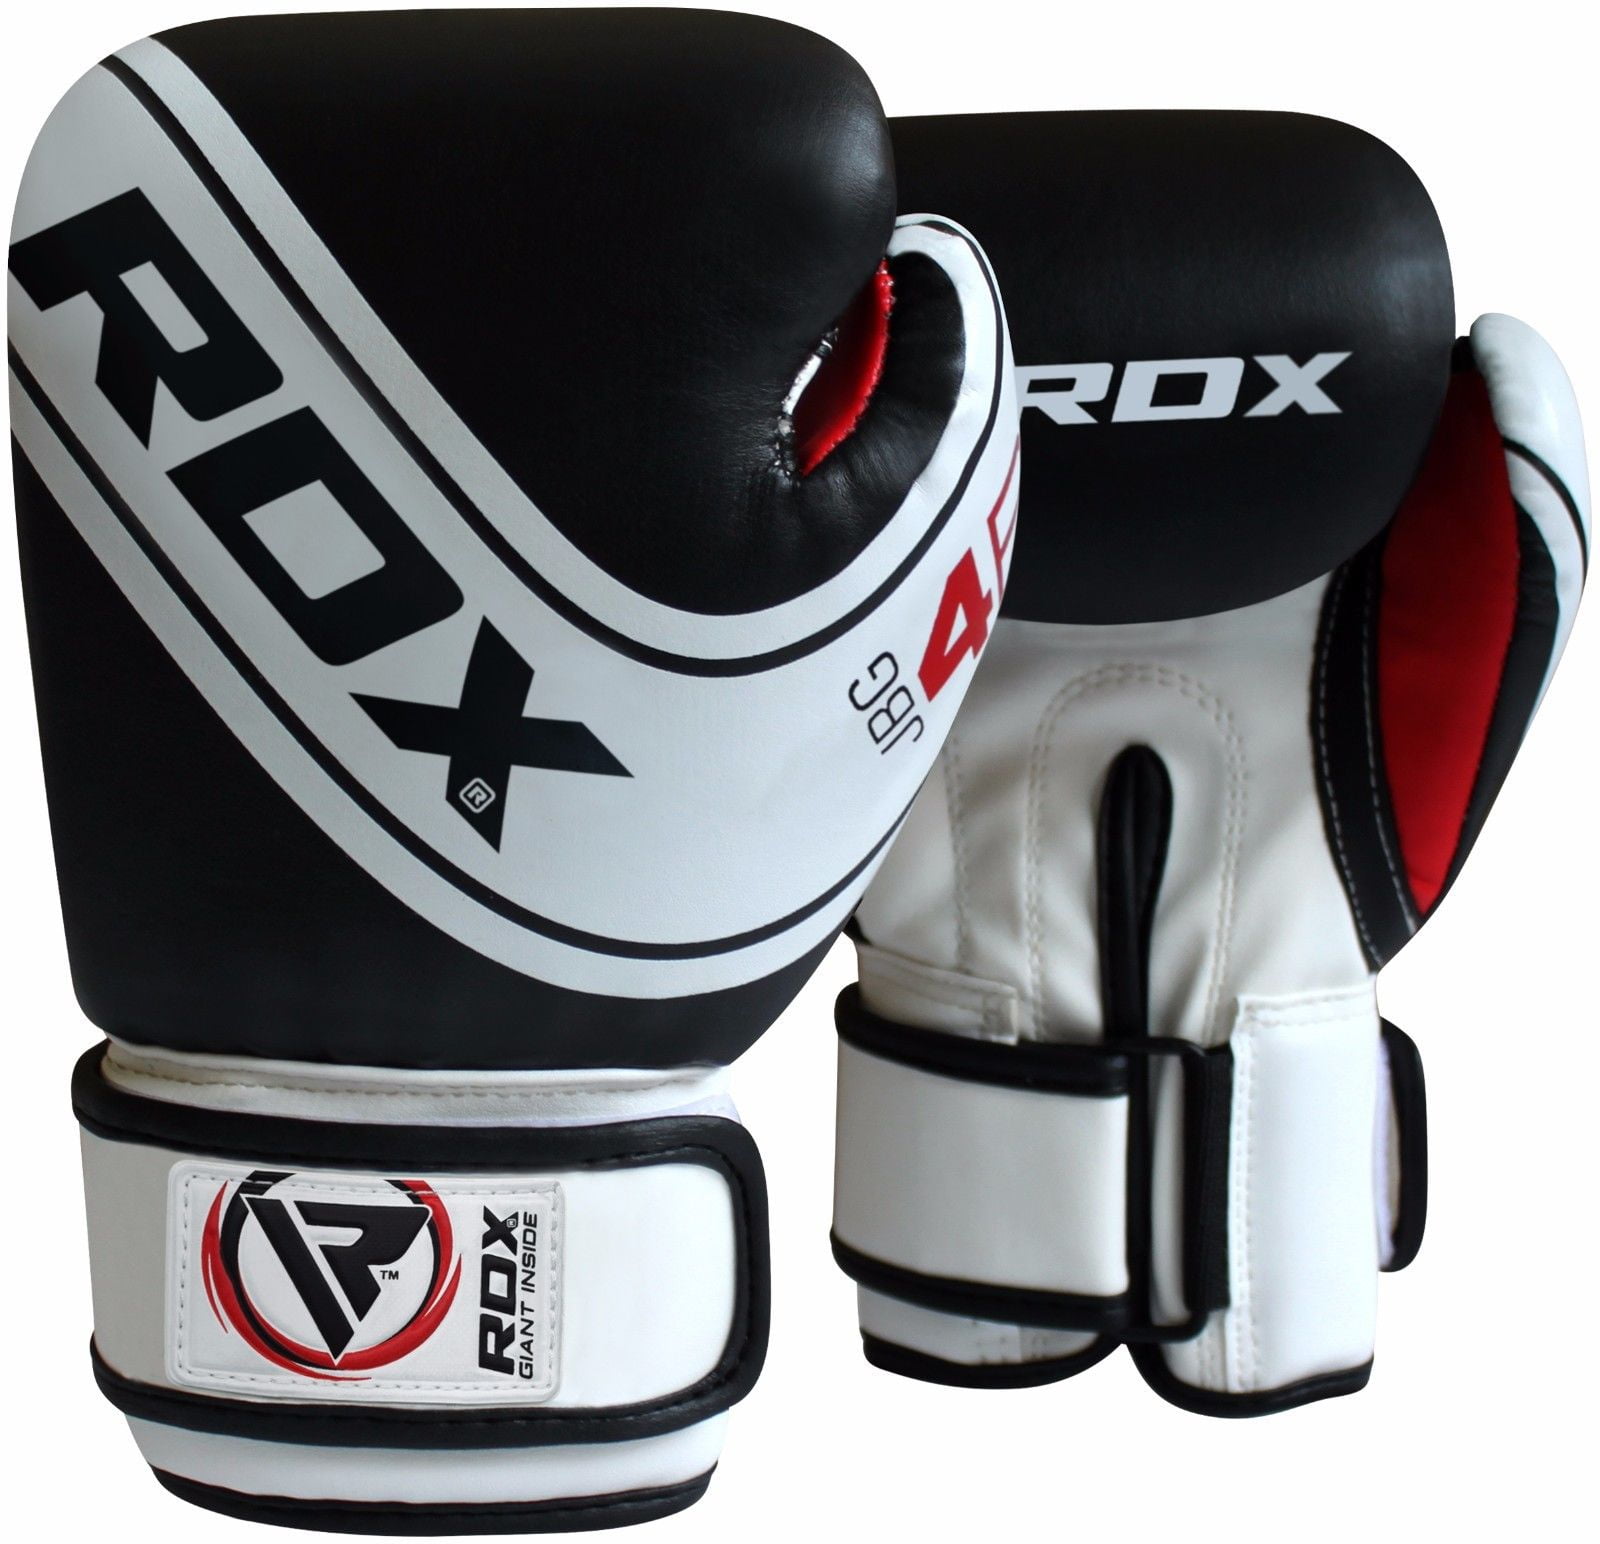 Kids boxing Training Gloves for Kickboxing Punch bag Focus pad Thai Pad MMA 